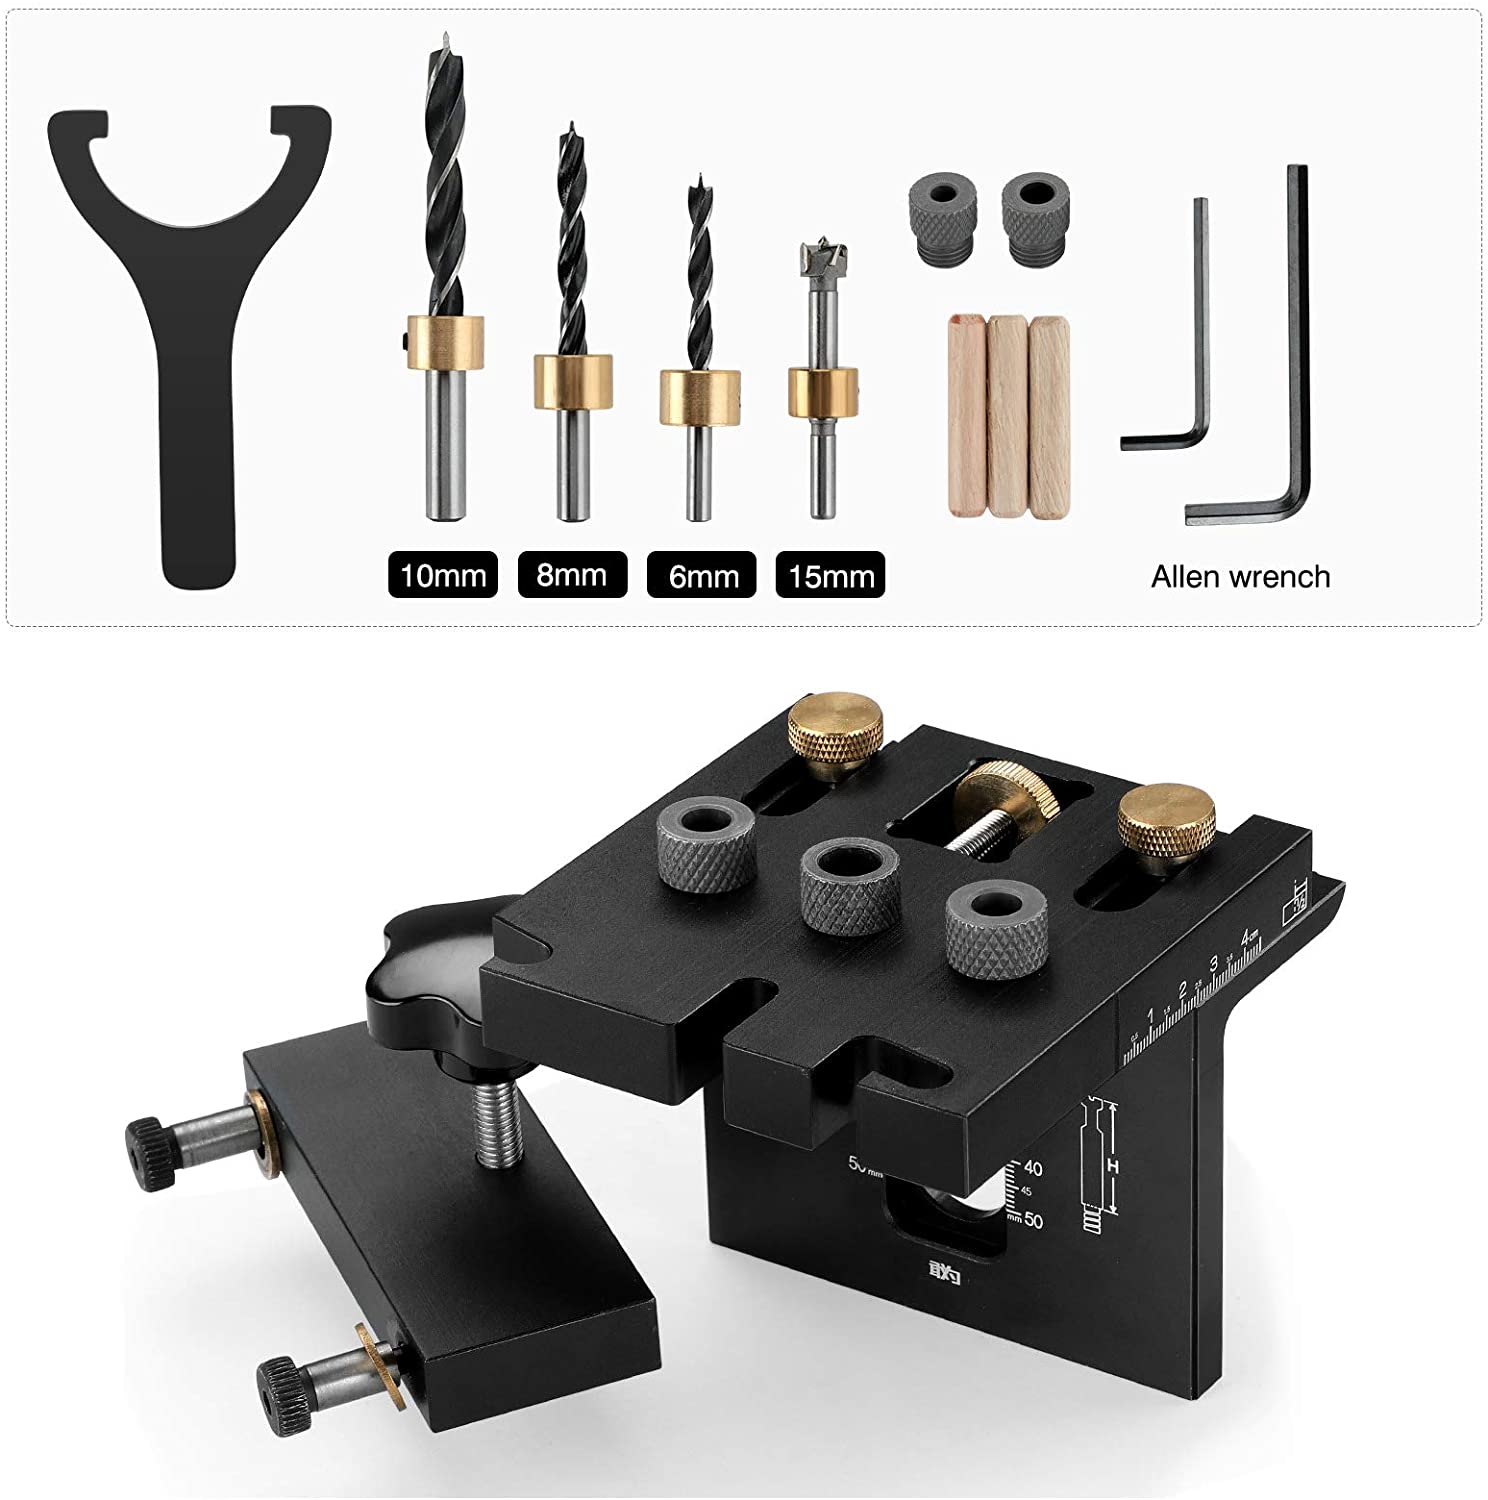 Woodworking Set, 3-in-1 Functionality, Adjustable Drill Guide